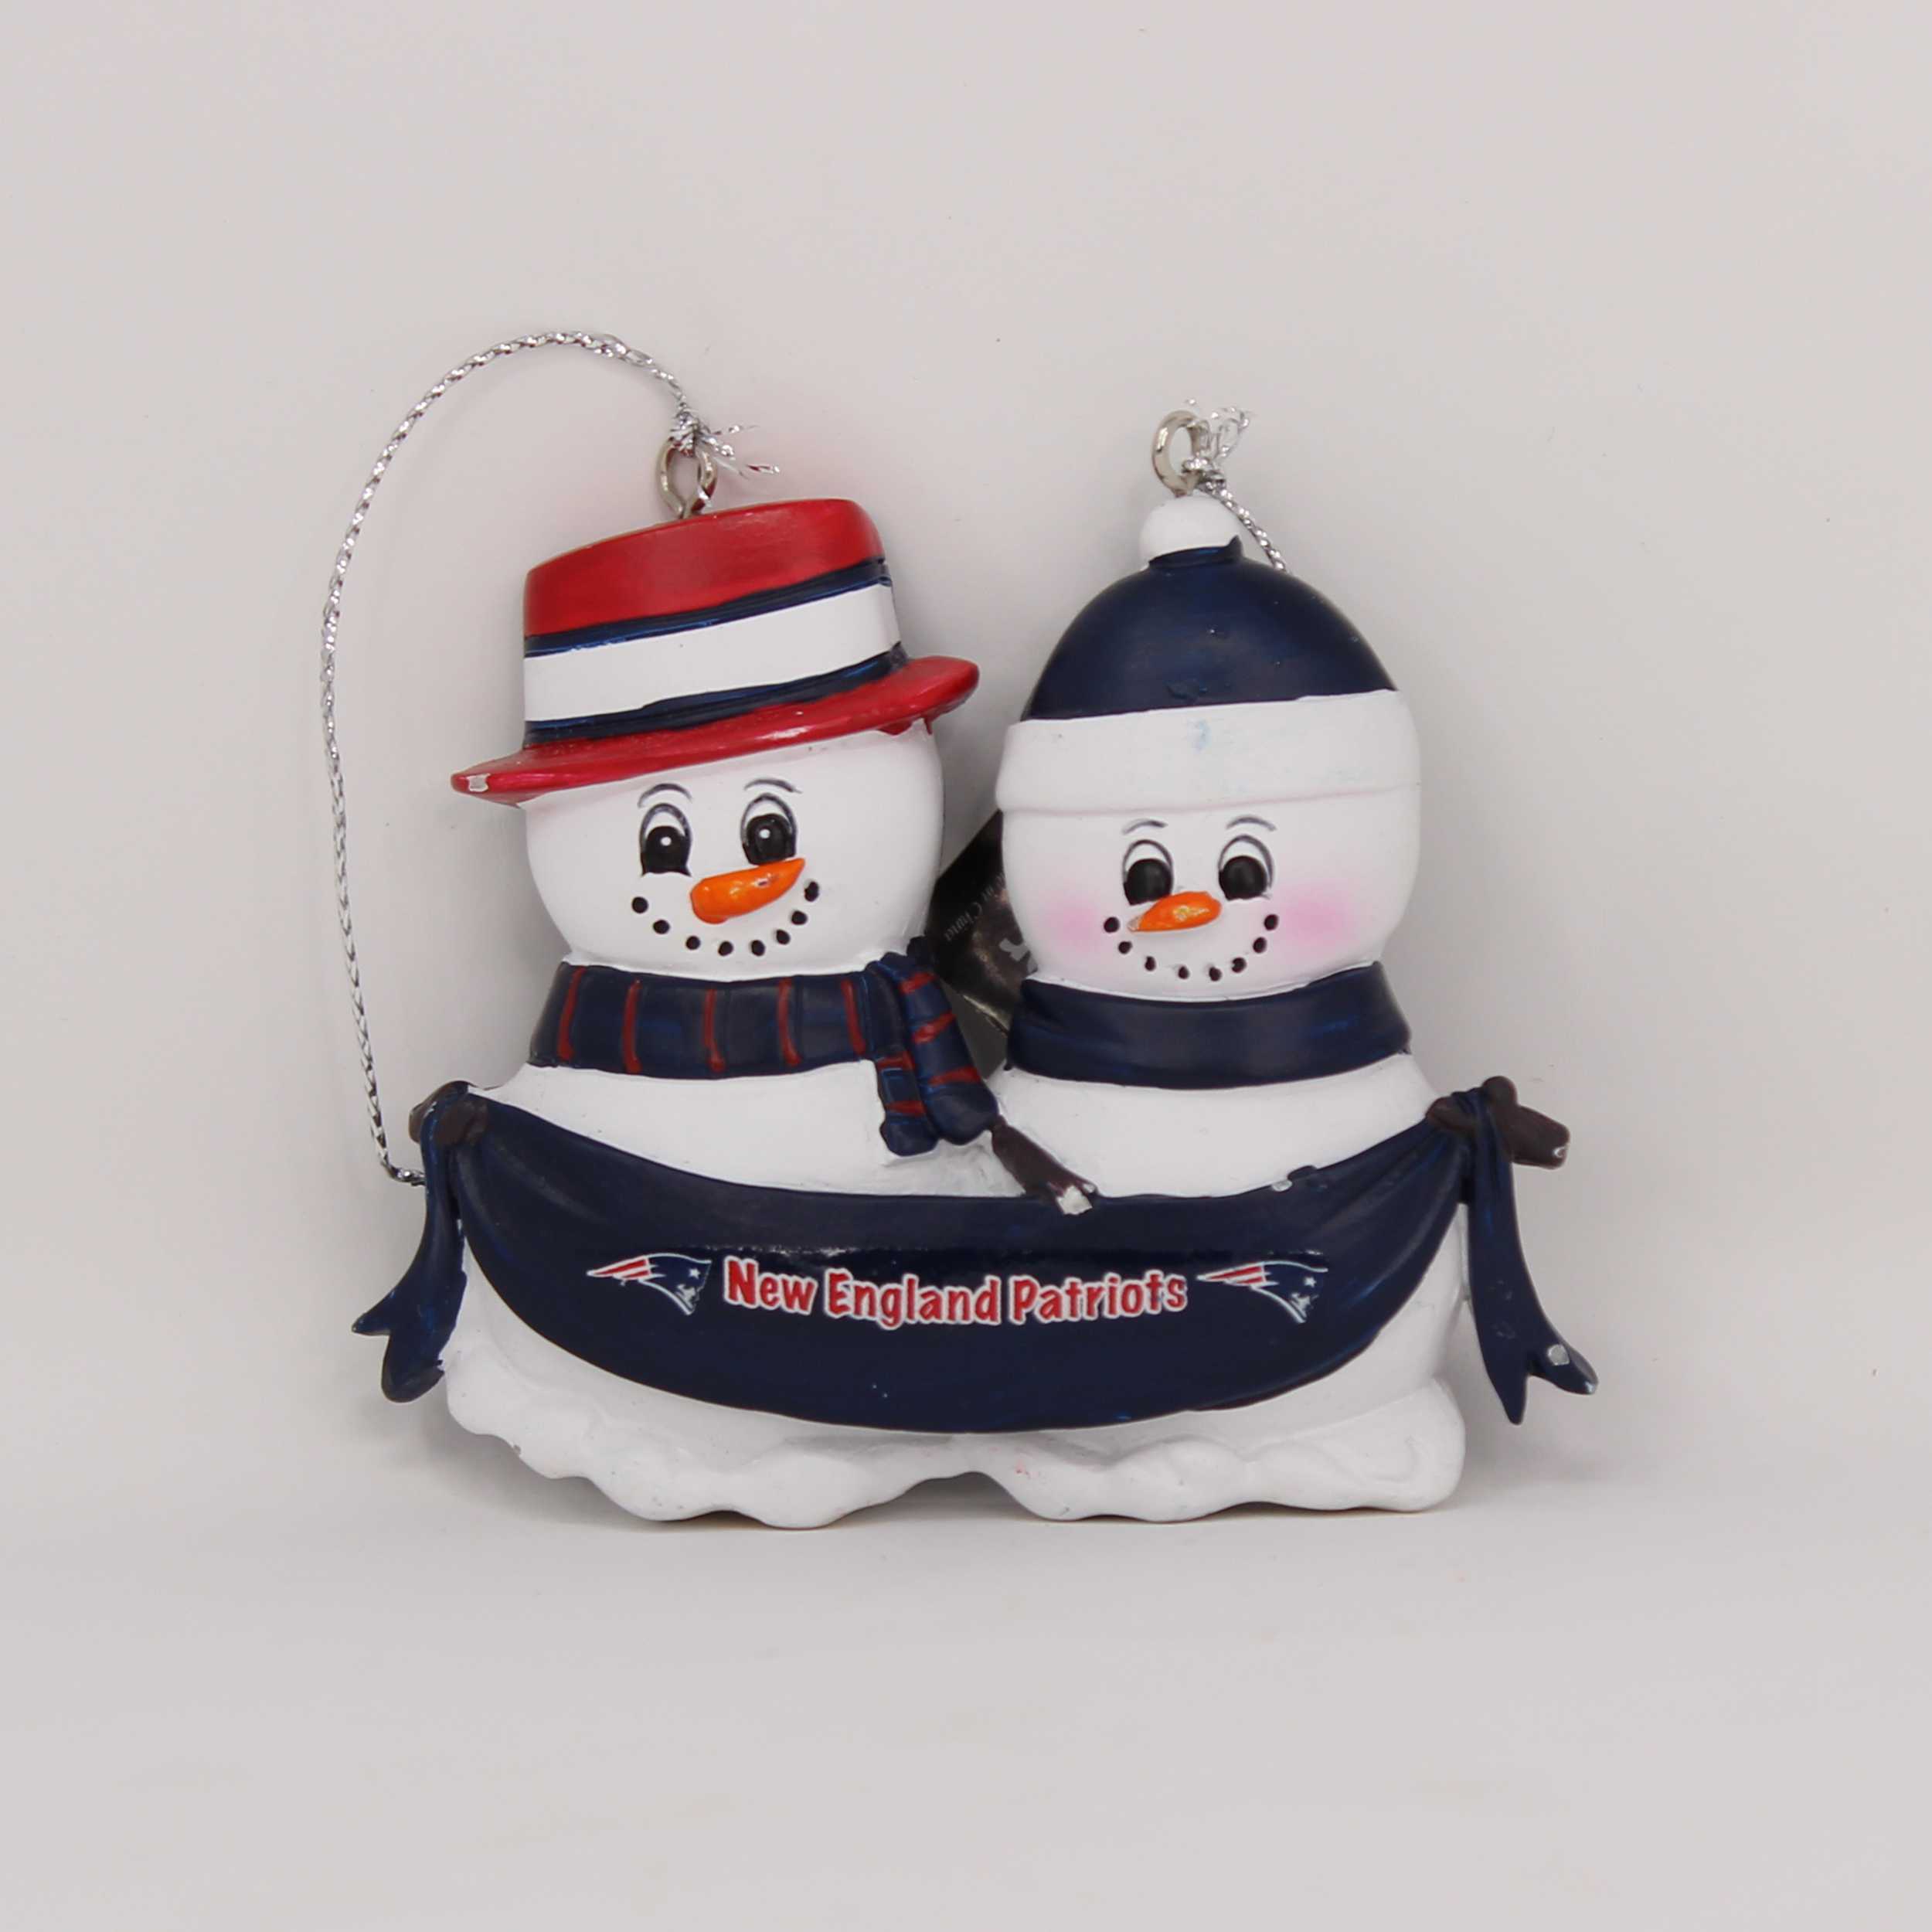 Personalized Family Ornament New England Patriots